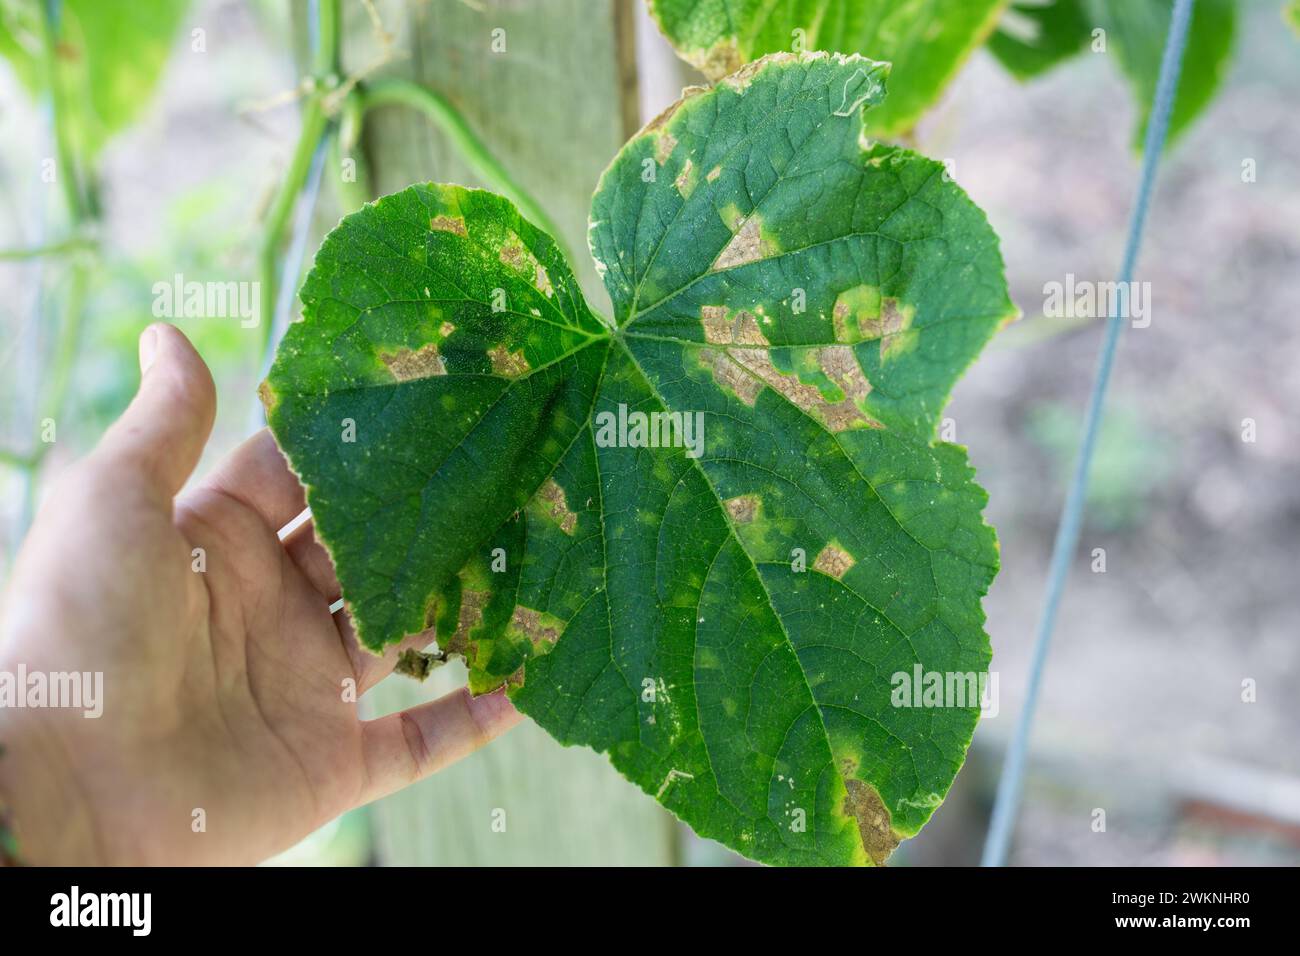 A gardener examines the leaves of a cucumber plant affected by cucumber mosaic disease. Spots on a green leaf. Stock Photo